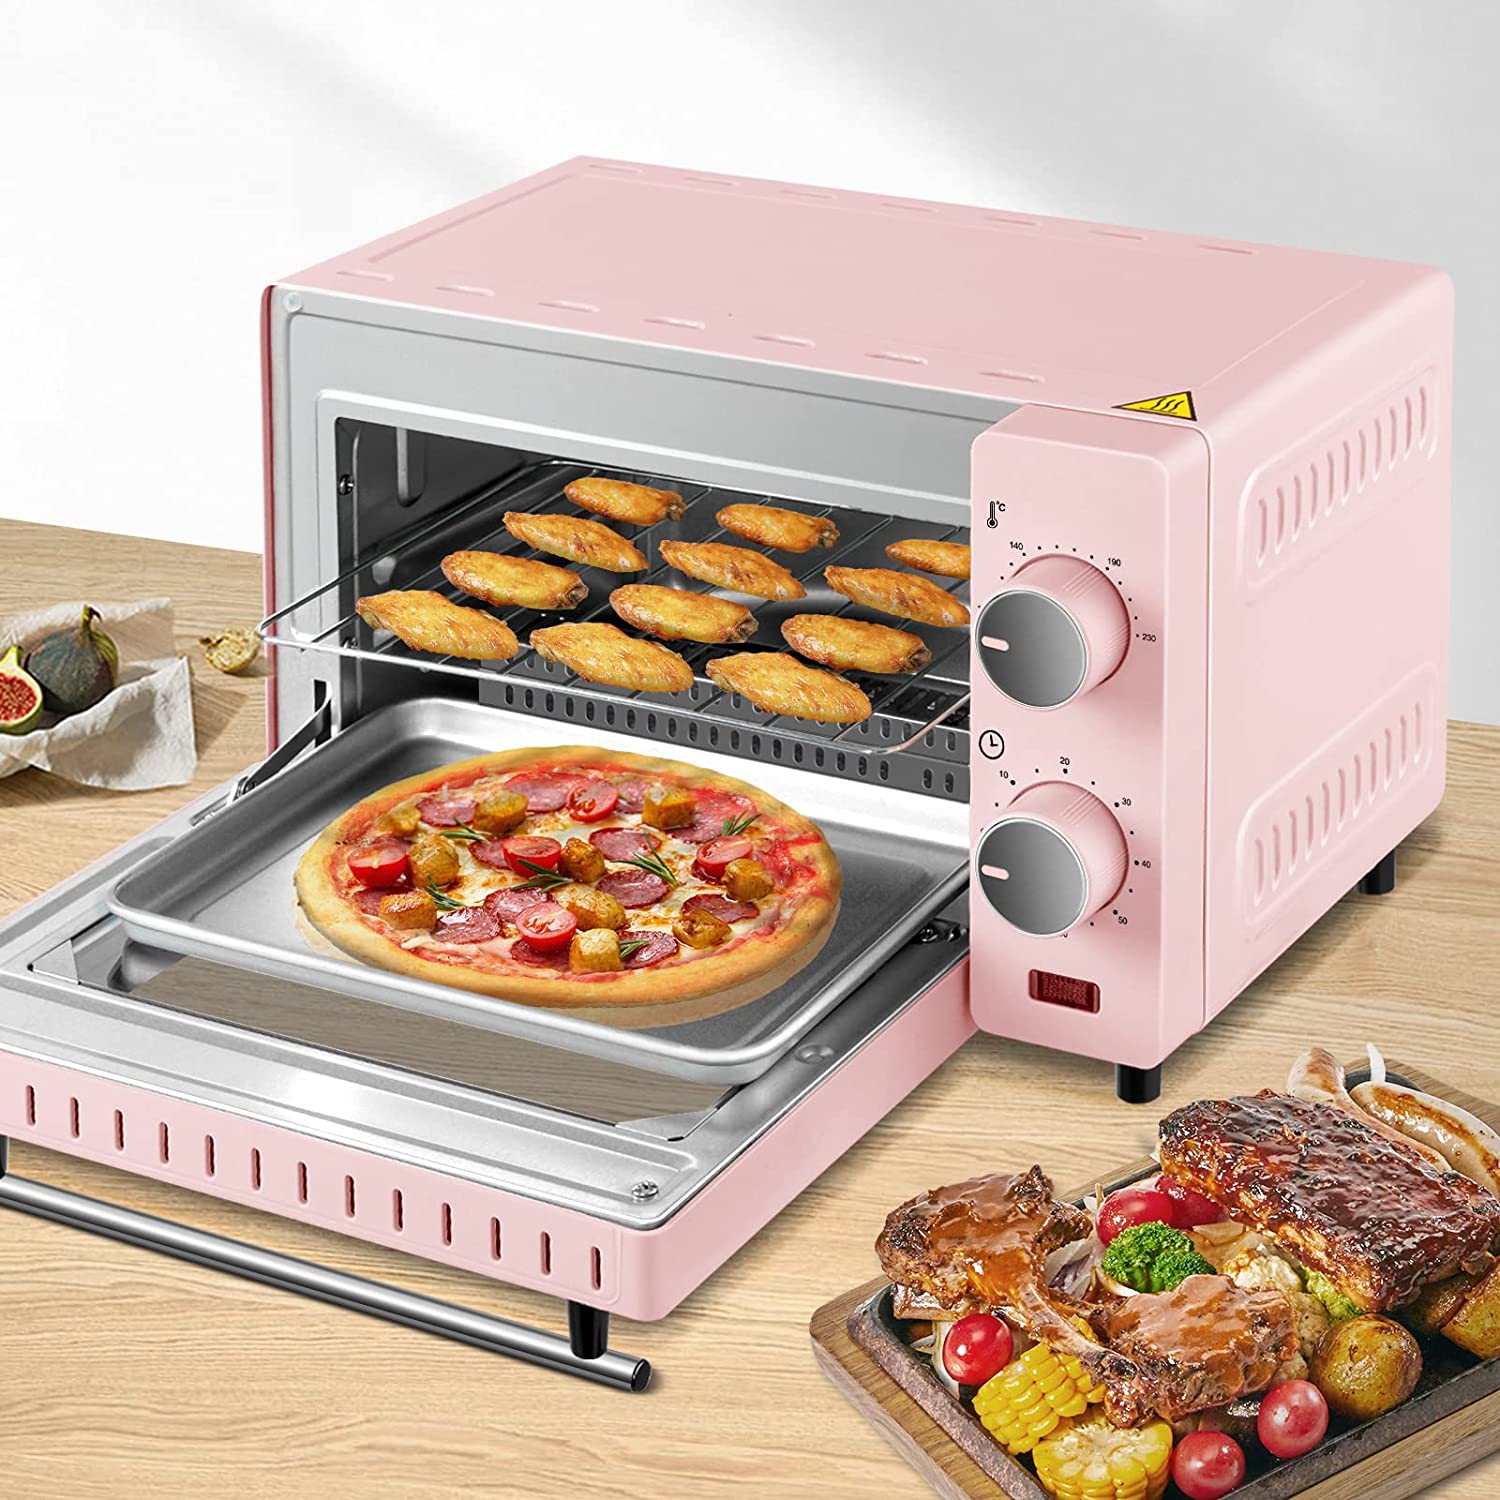 WOLTU Mini Oven 10 Litre, 650W Electric Oven, Small Table Top Oven, 100-230°C, 60 Min. Timer, with Baking Tray, Grill Rack, Removal Handle, Pink, BF10rs